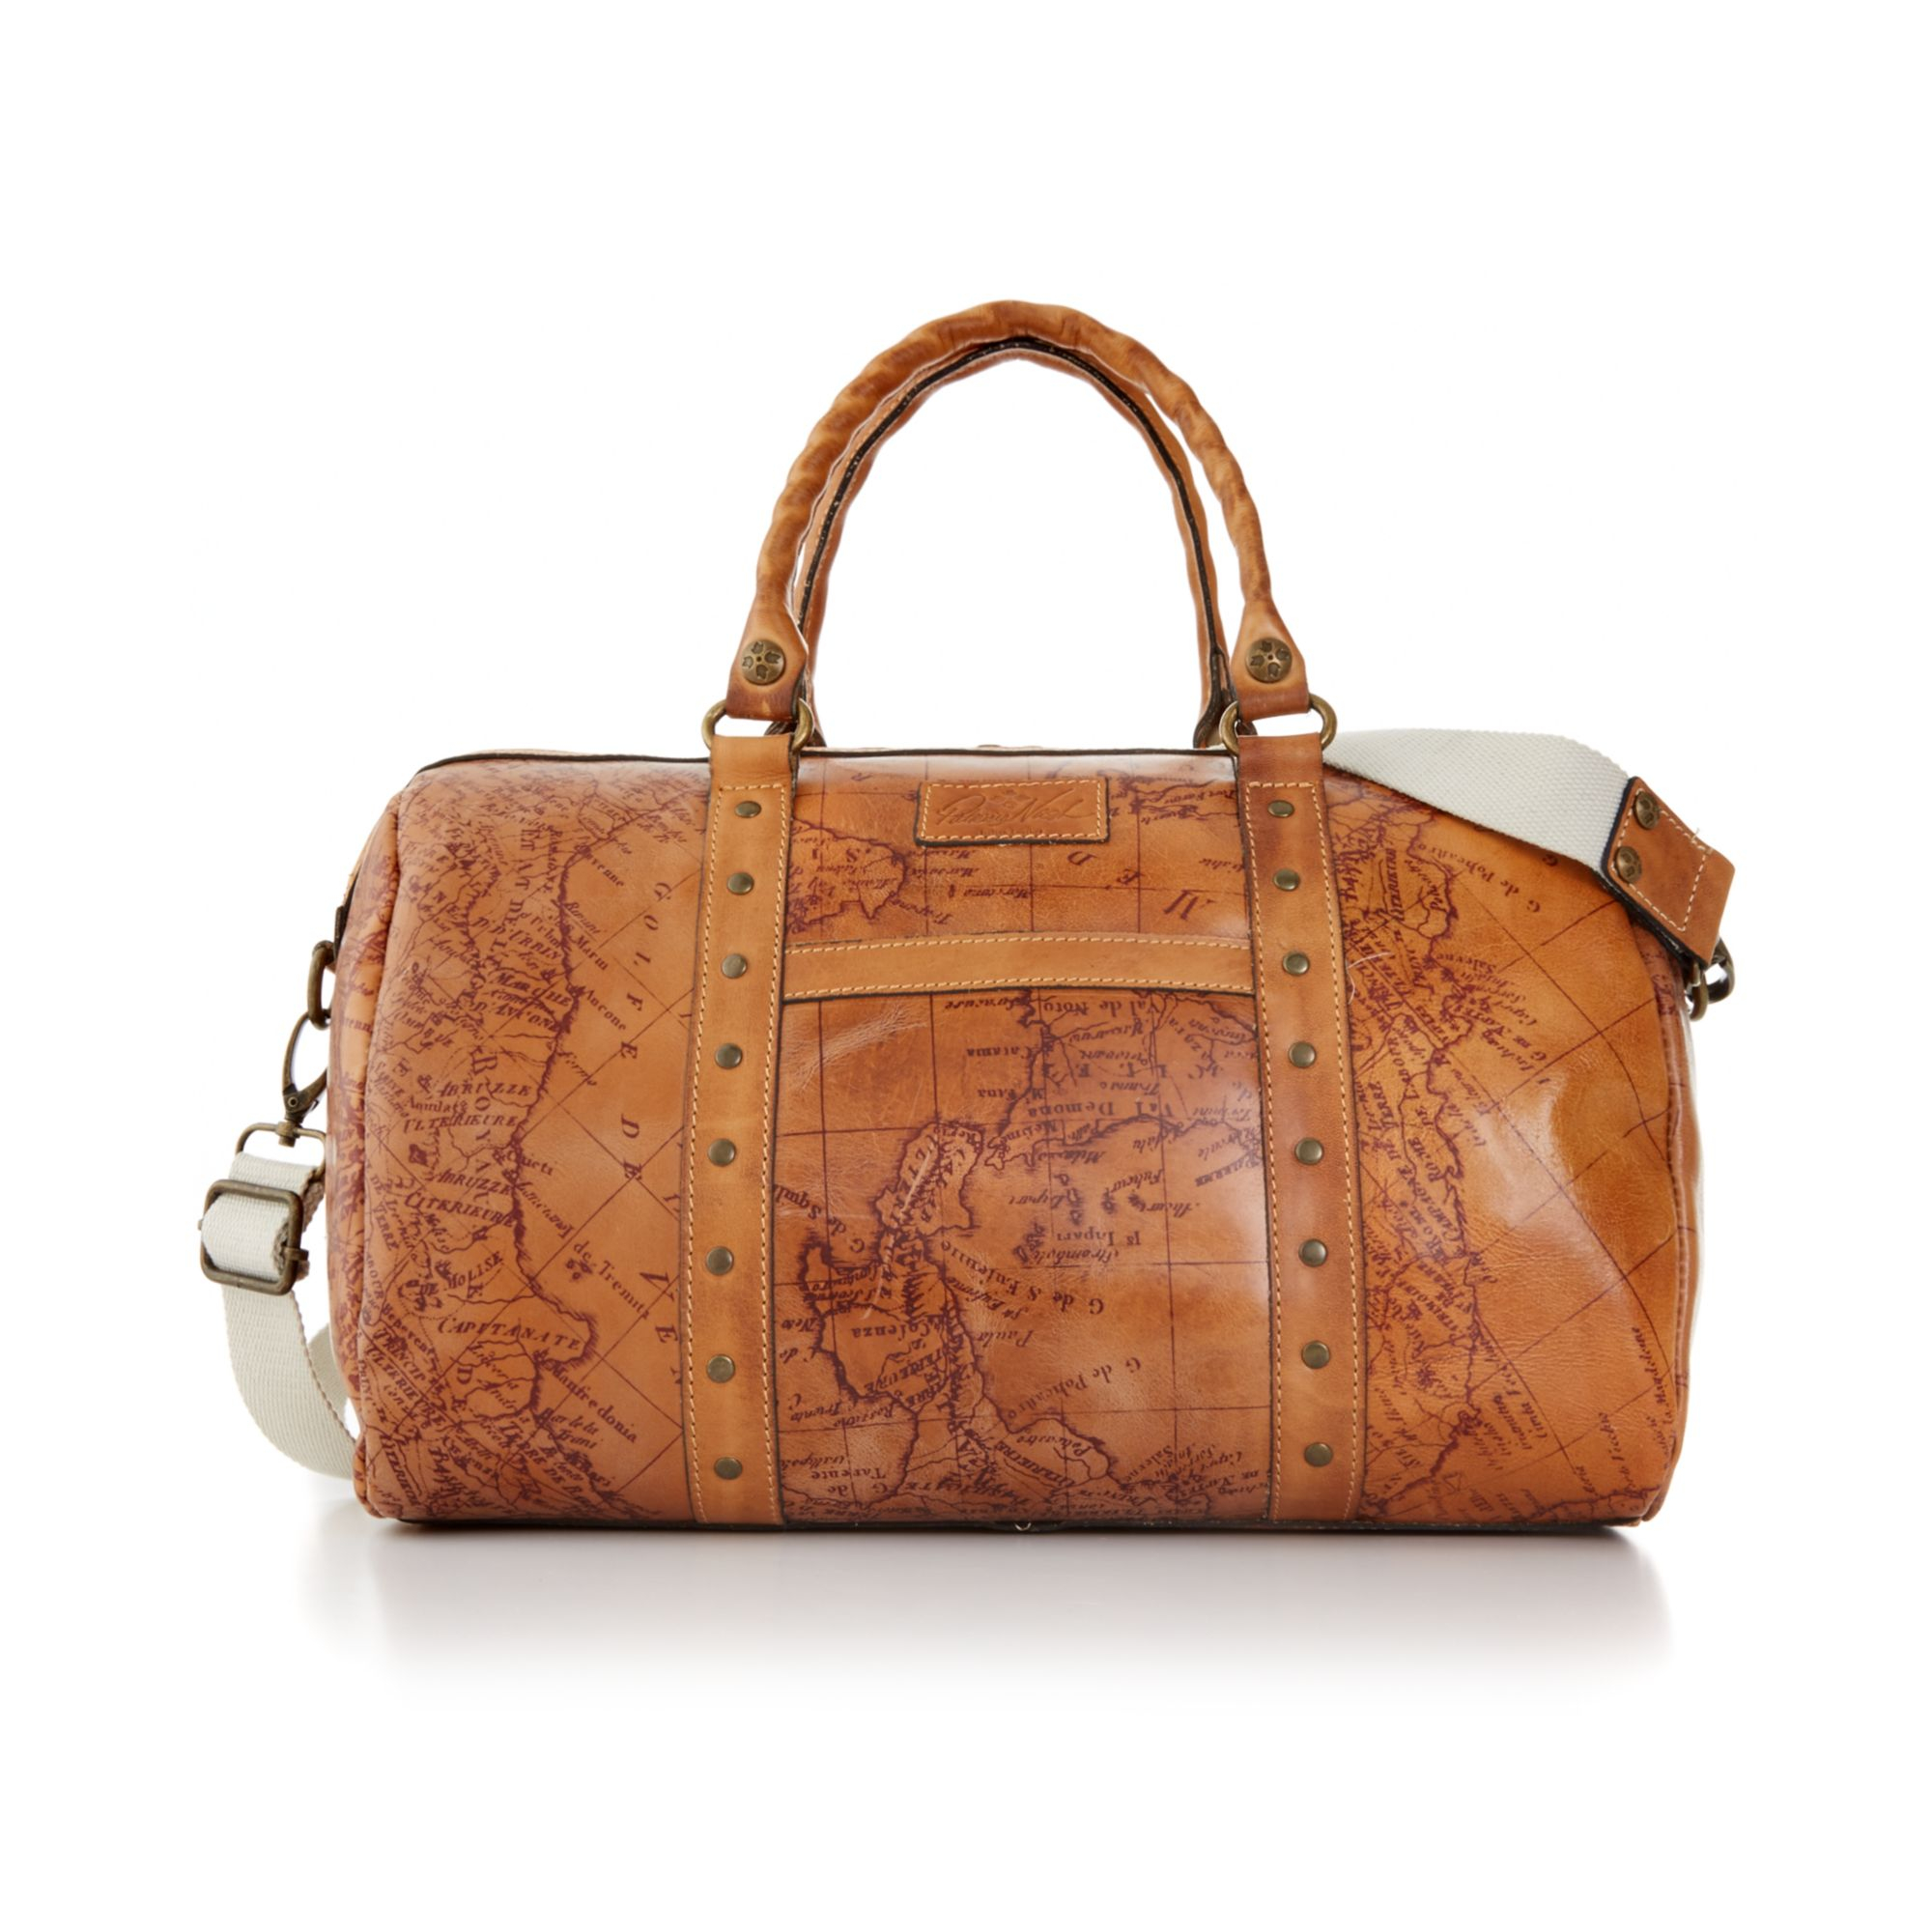 Patricia Nash Brown Signature Map Stressa Overnighter Bag Product 1 18463908 1 040528908 Normal 